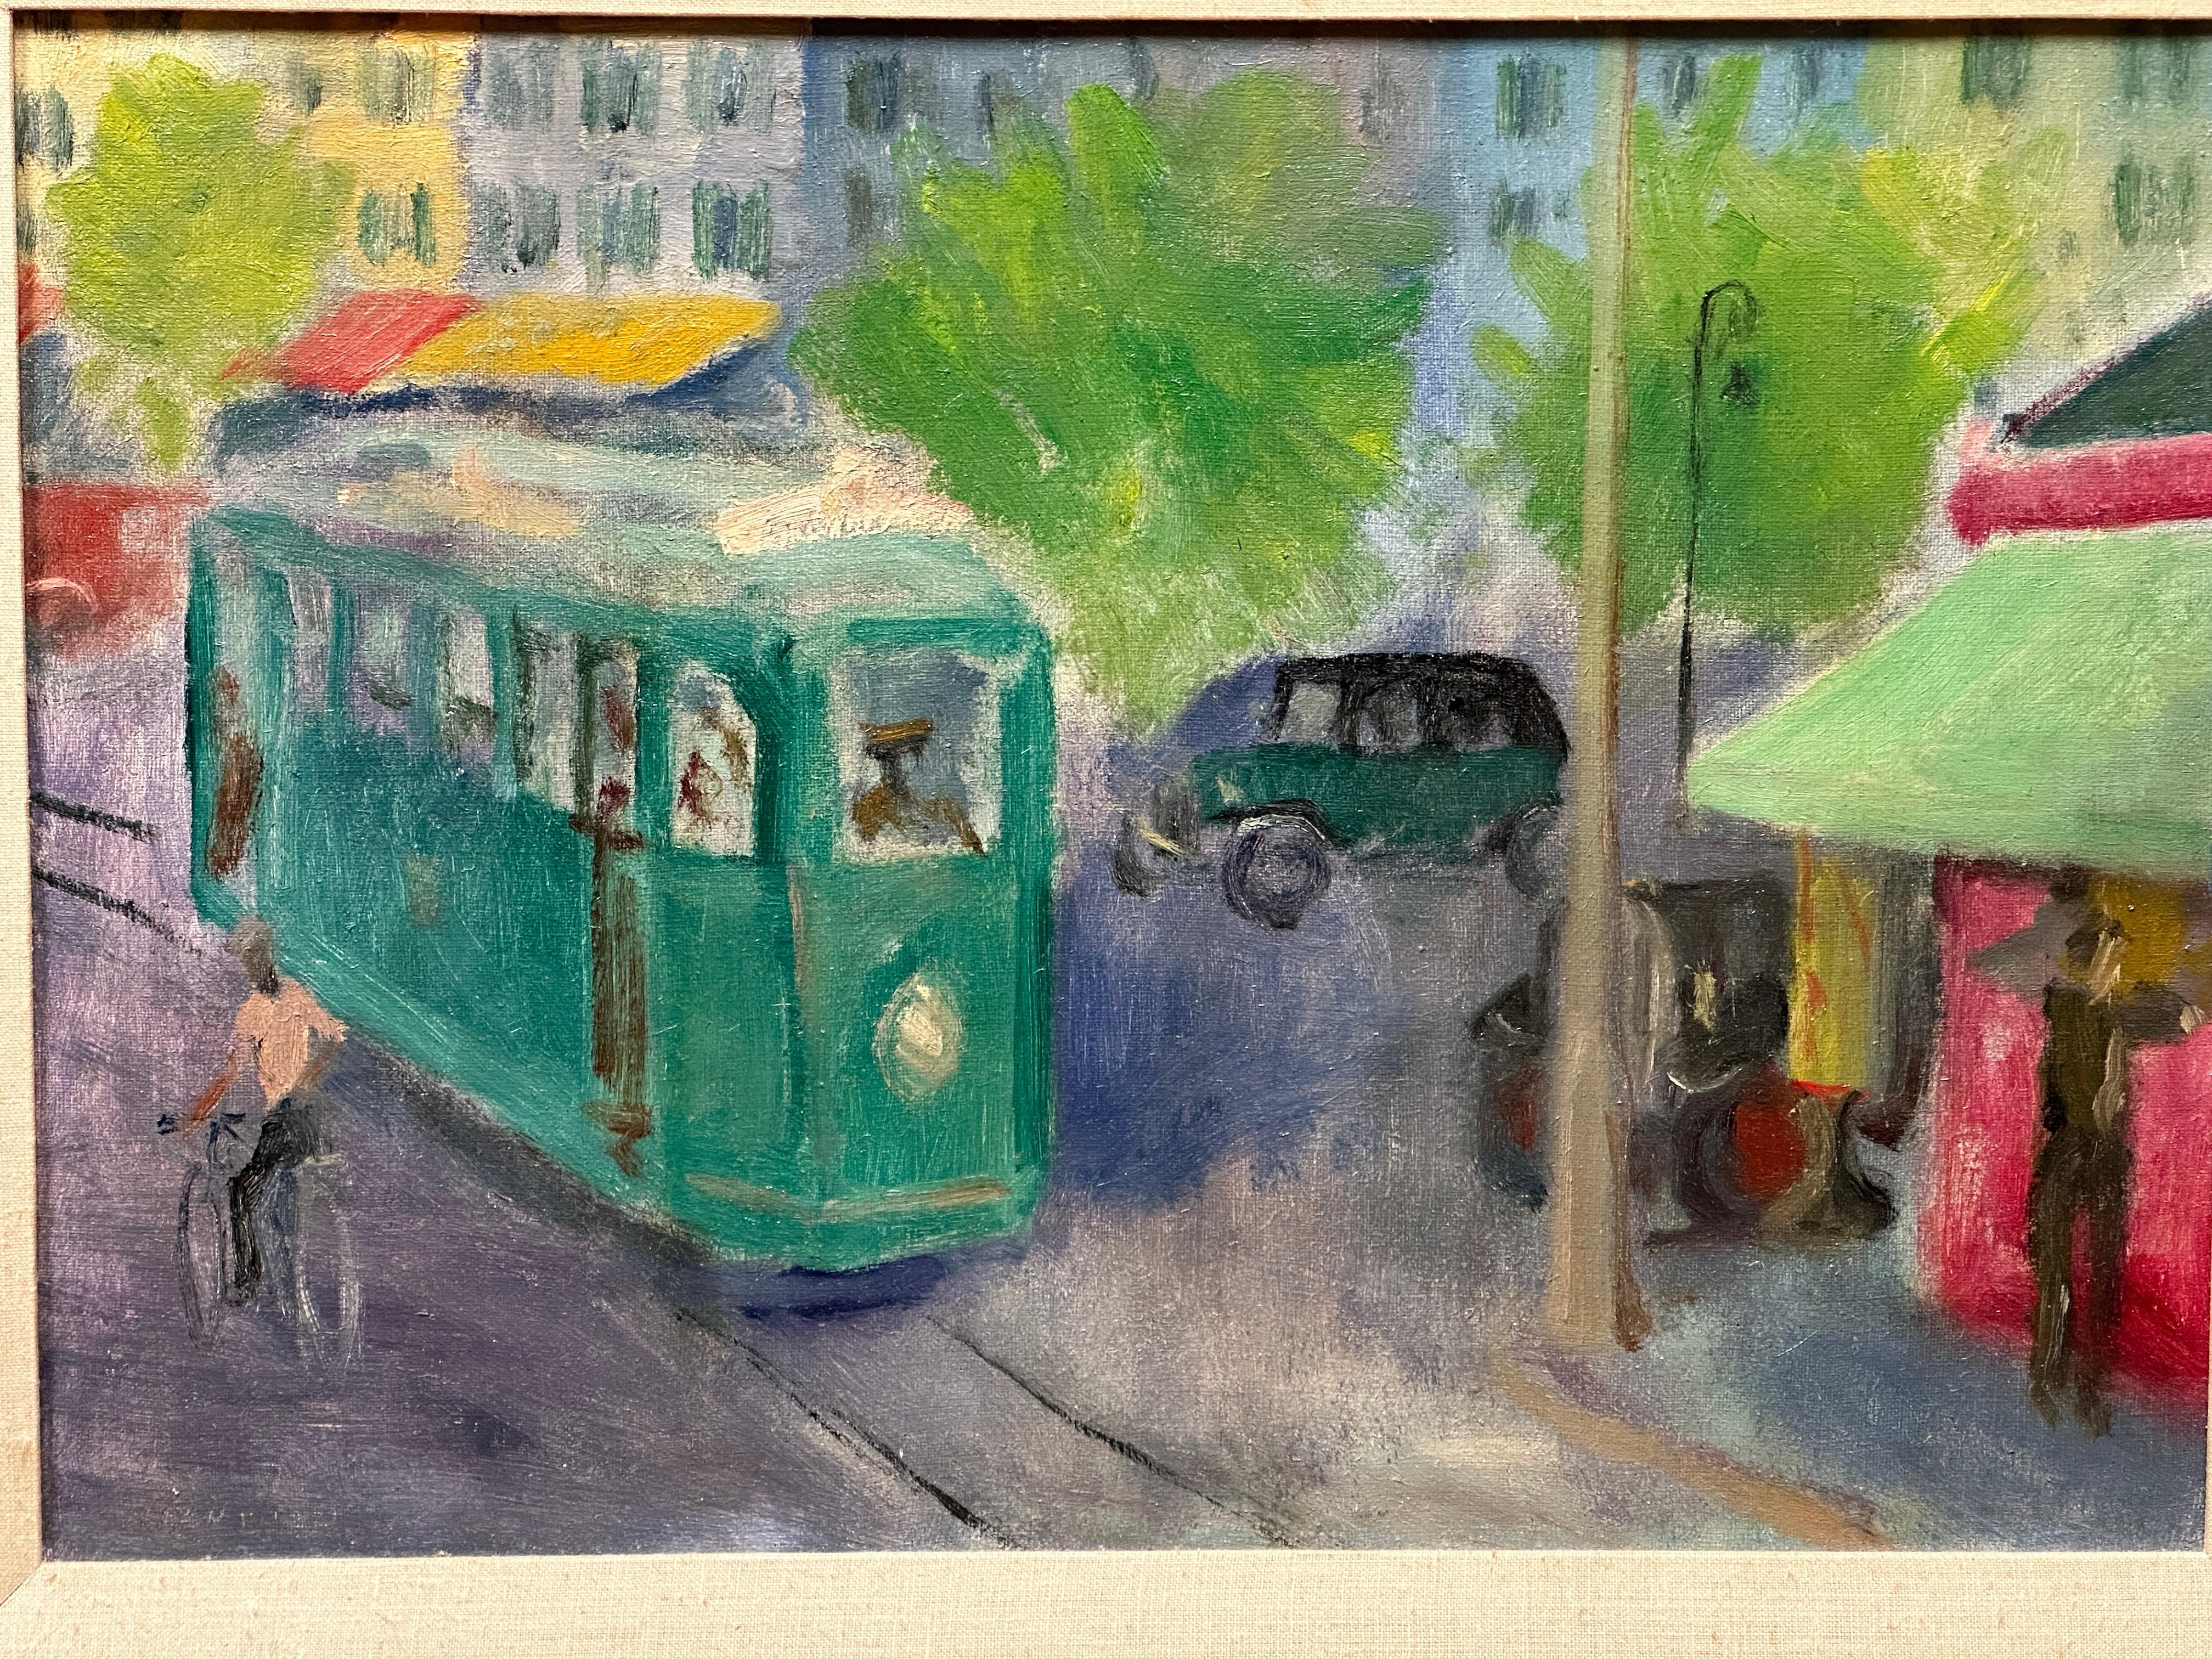 Captured on canvas with delicate impressionist strokes, this oil painting transports us to the bustling streets of San Francisco. On the left, a vintage blue-green tram glides towards the foreground. Opposite, a lone bicyclist casually passes by the